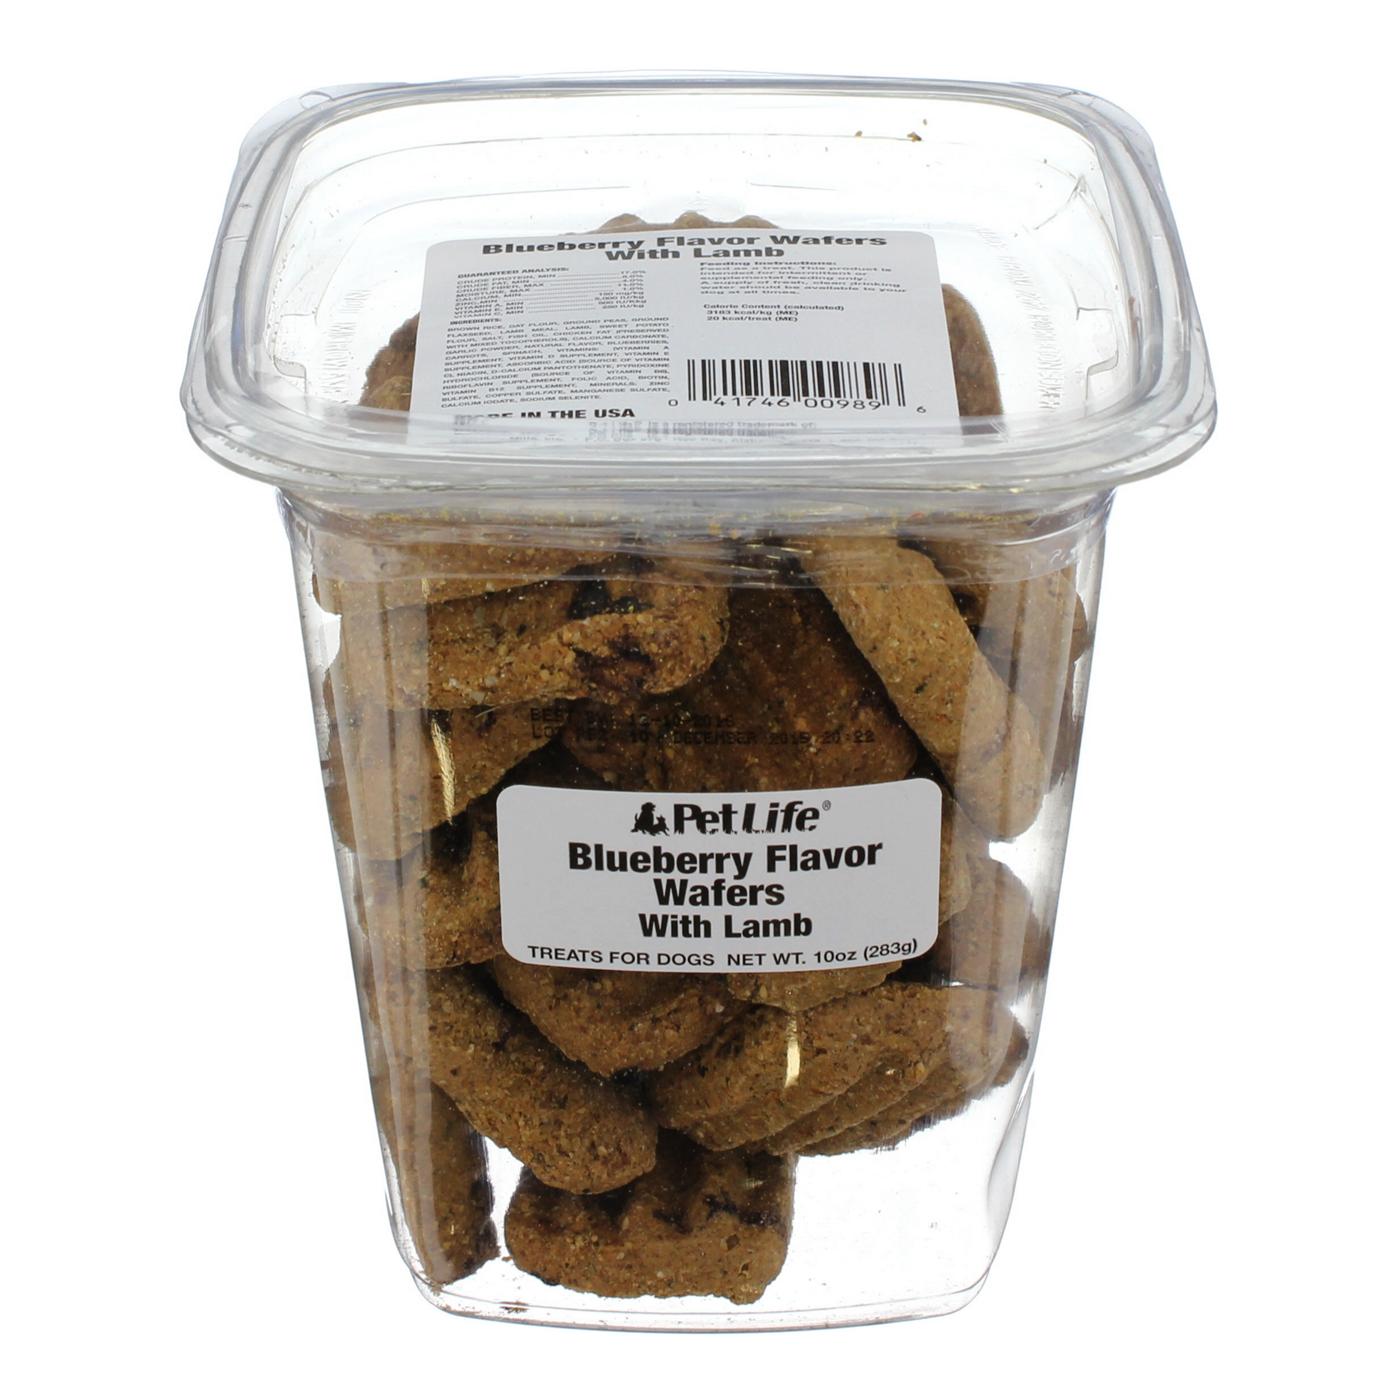 Pet Life Blueberry Wafers with Lamb for Dogs; image 1 of 2